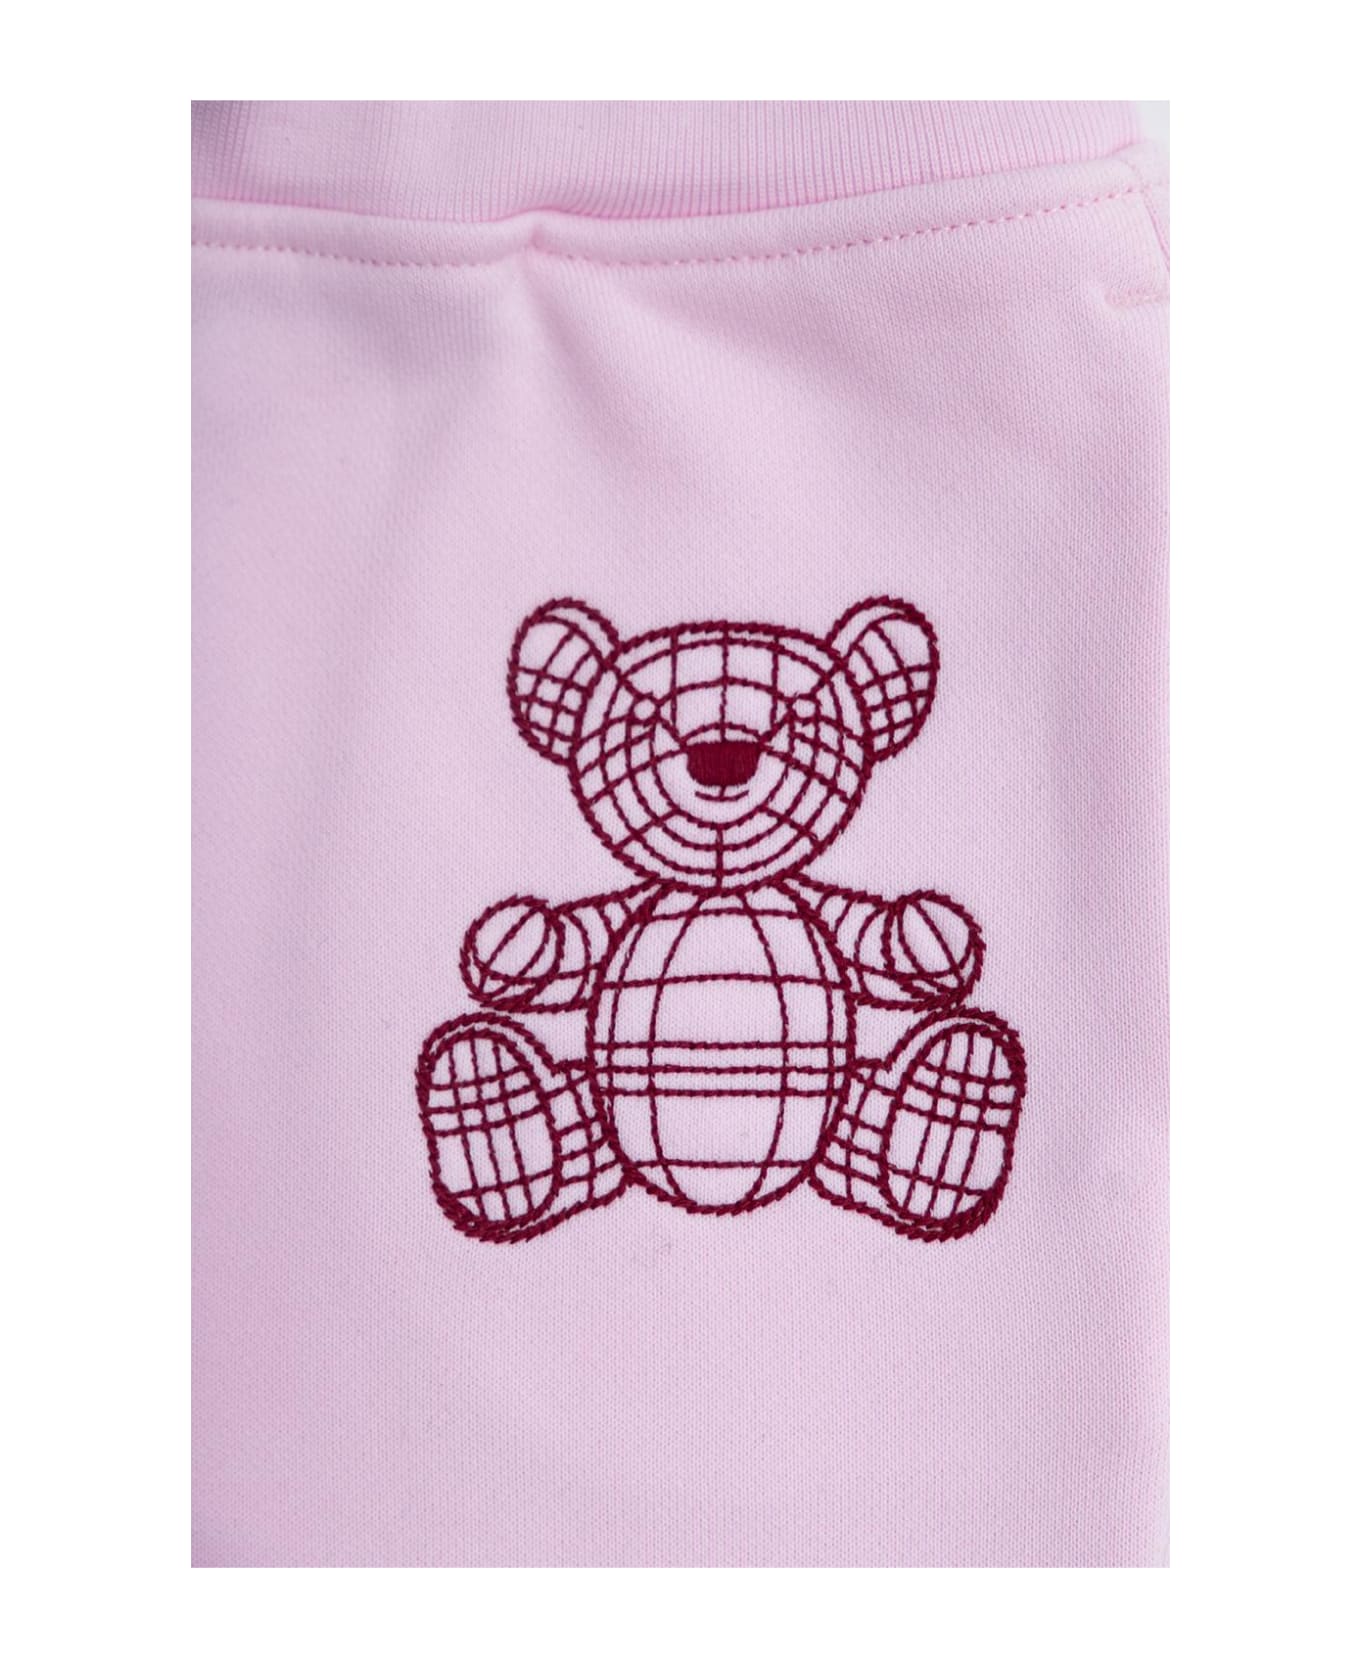 Burberry Sweatpants With Teddy Bear Motif - PINK ボトムス